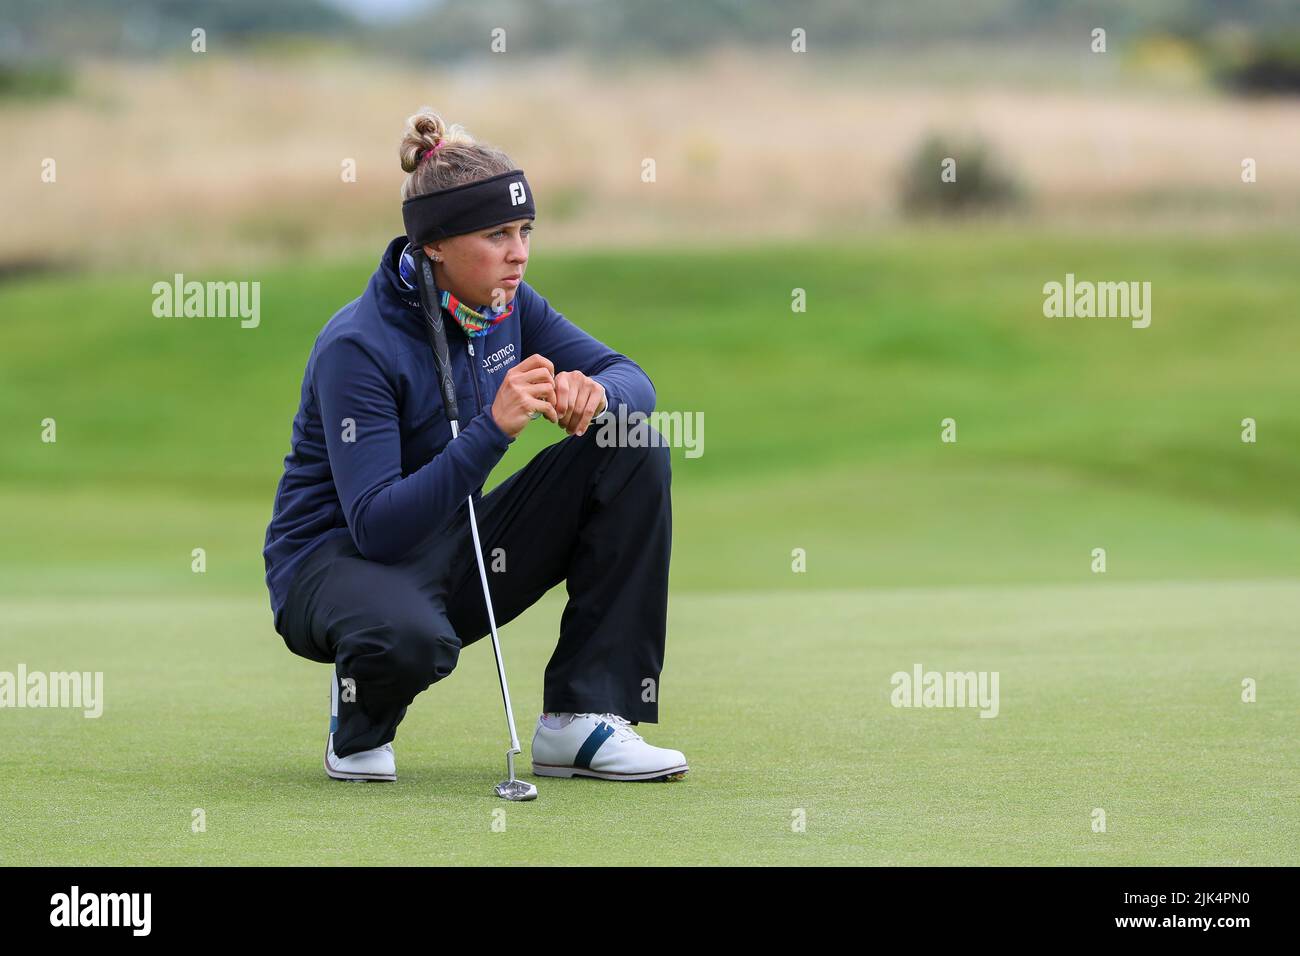 Irvine, UK. 30th July, 2022. The third round of the Trust Golf Women's Scottish Golf took place with 75 players making the cut. Heavy overnight rain from Friday into Saturday made for a softer and more testing course. Pauline Rousin waiting to putt on the 5th green. Credit: Findlay/Alamy Live News Stock Photo